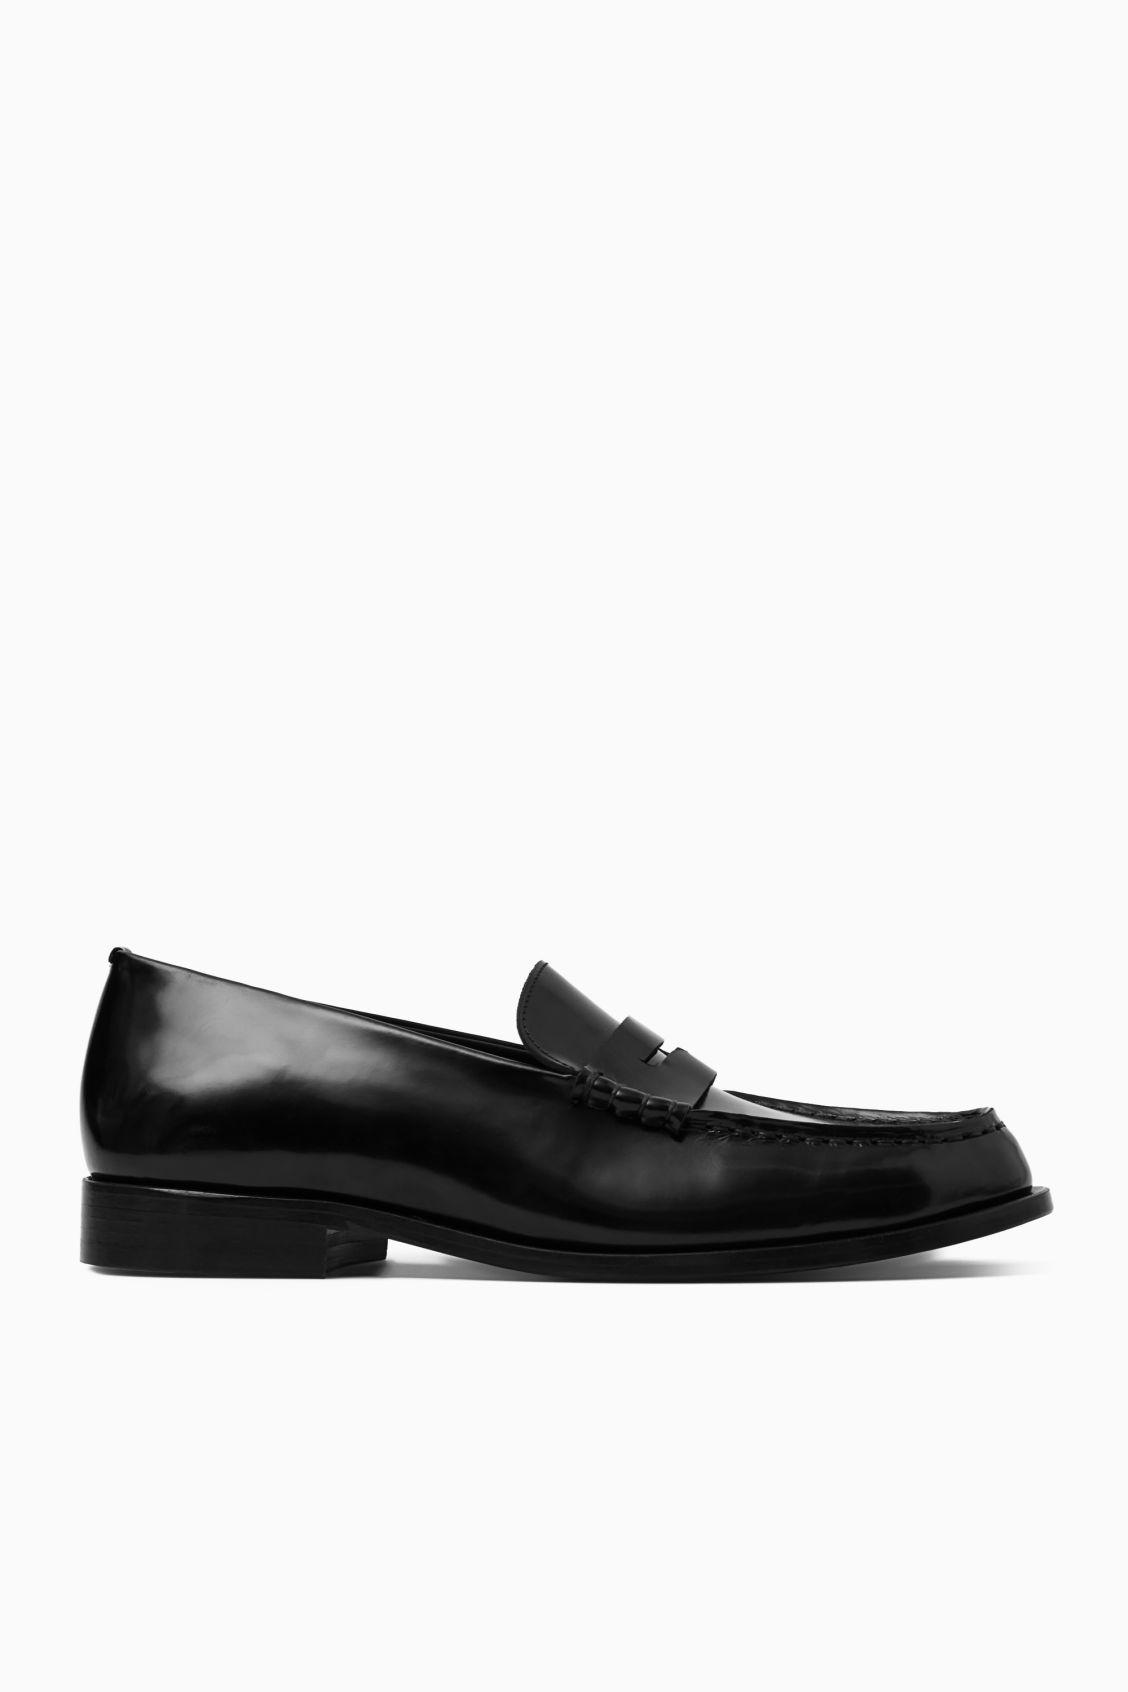 COS Classic Leather Penny Loafers in Black for Men | Lyst